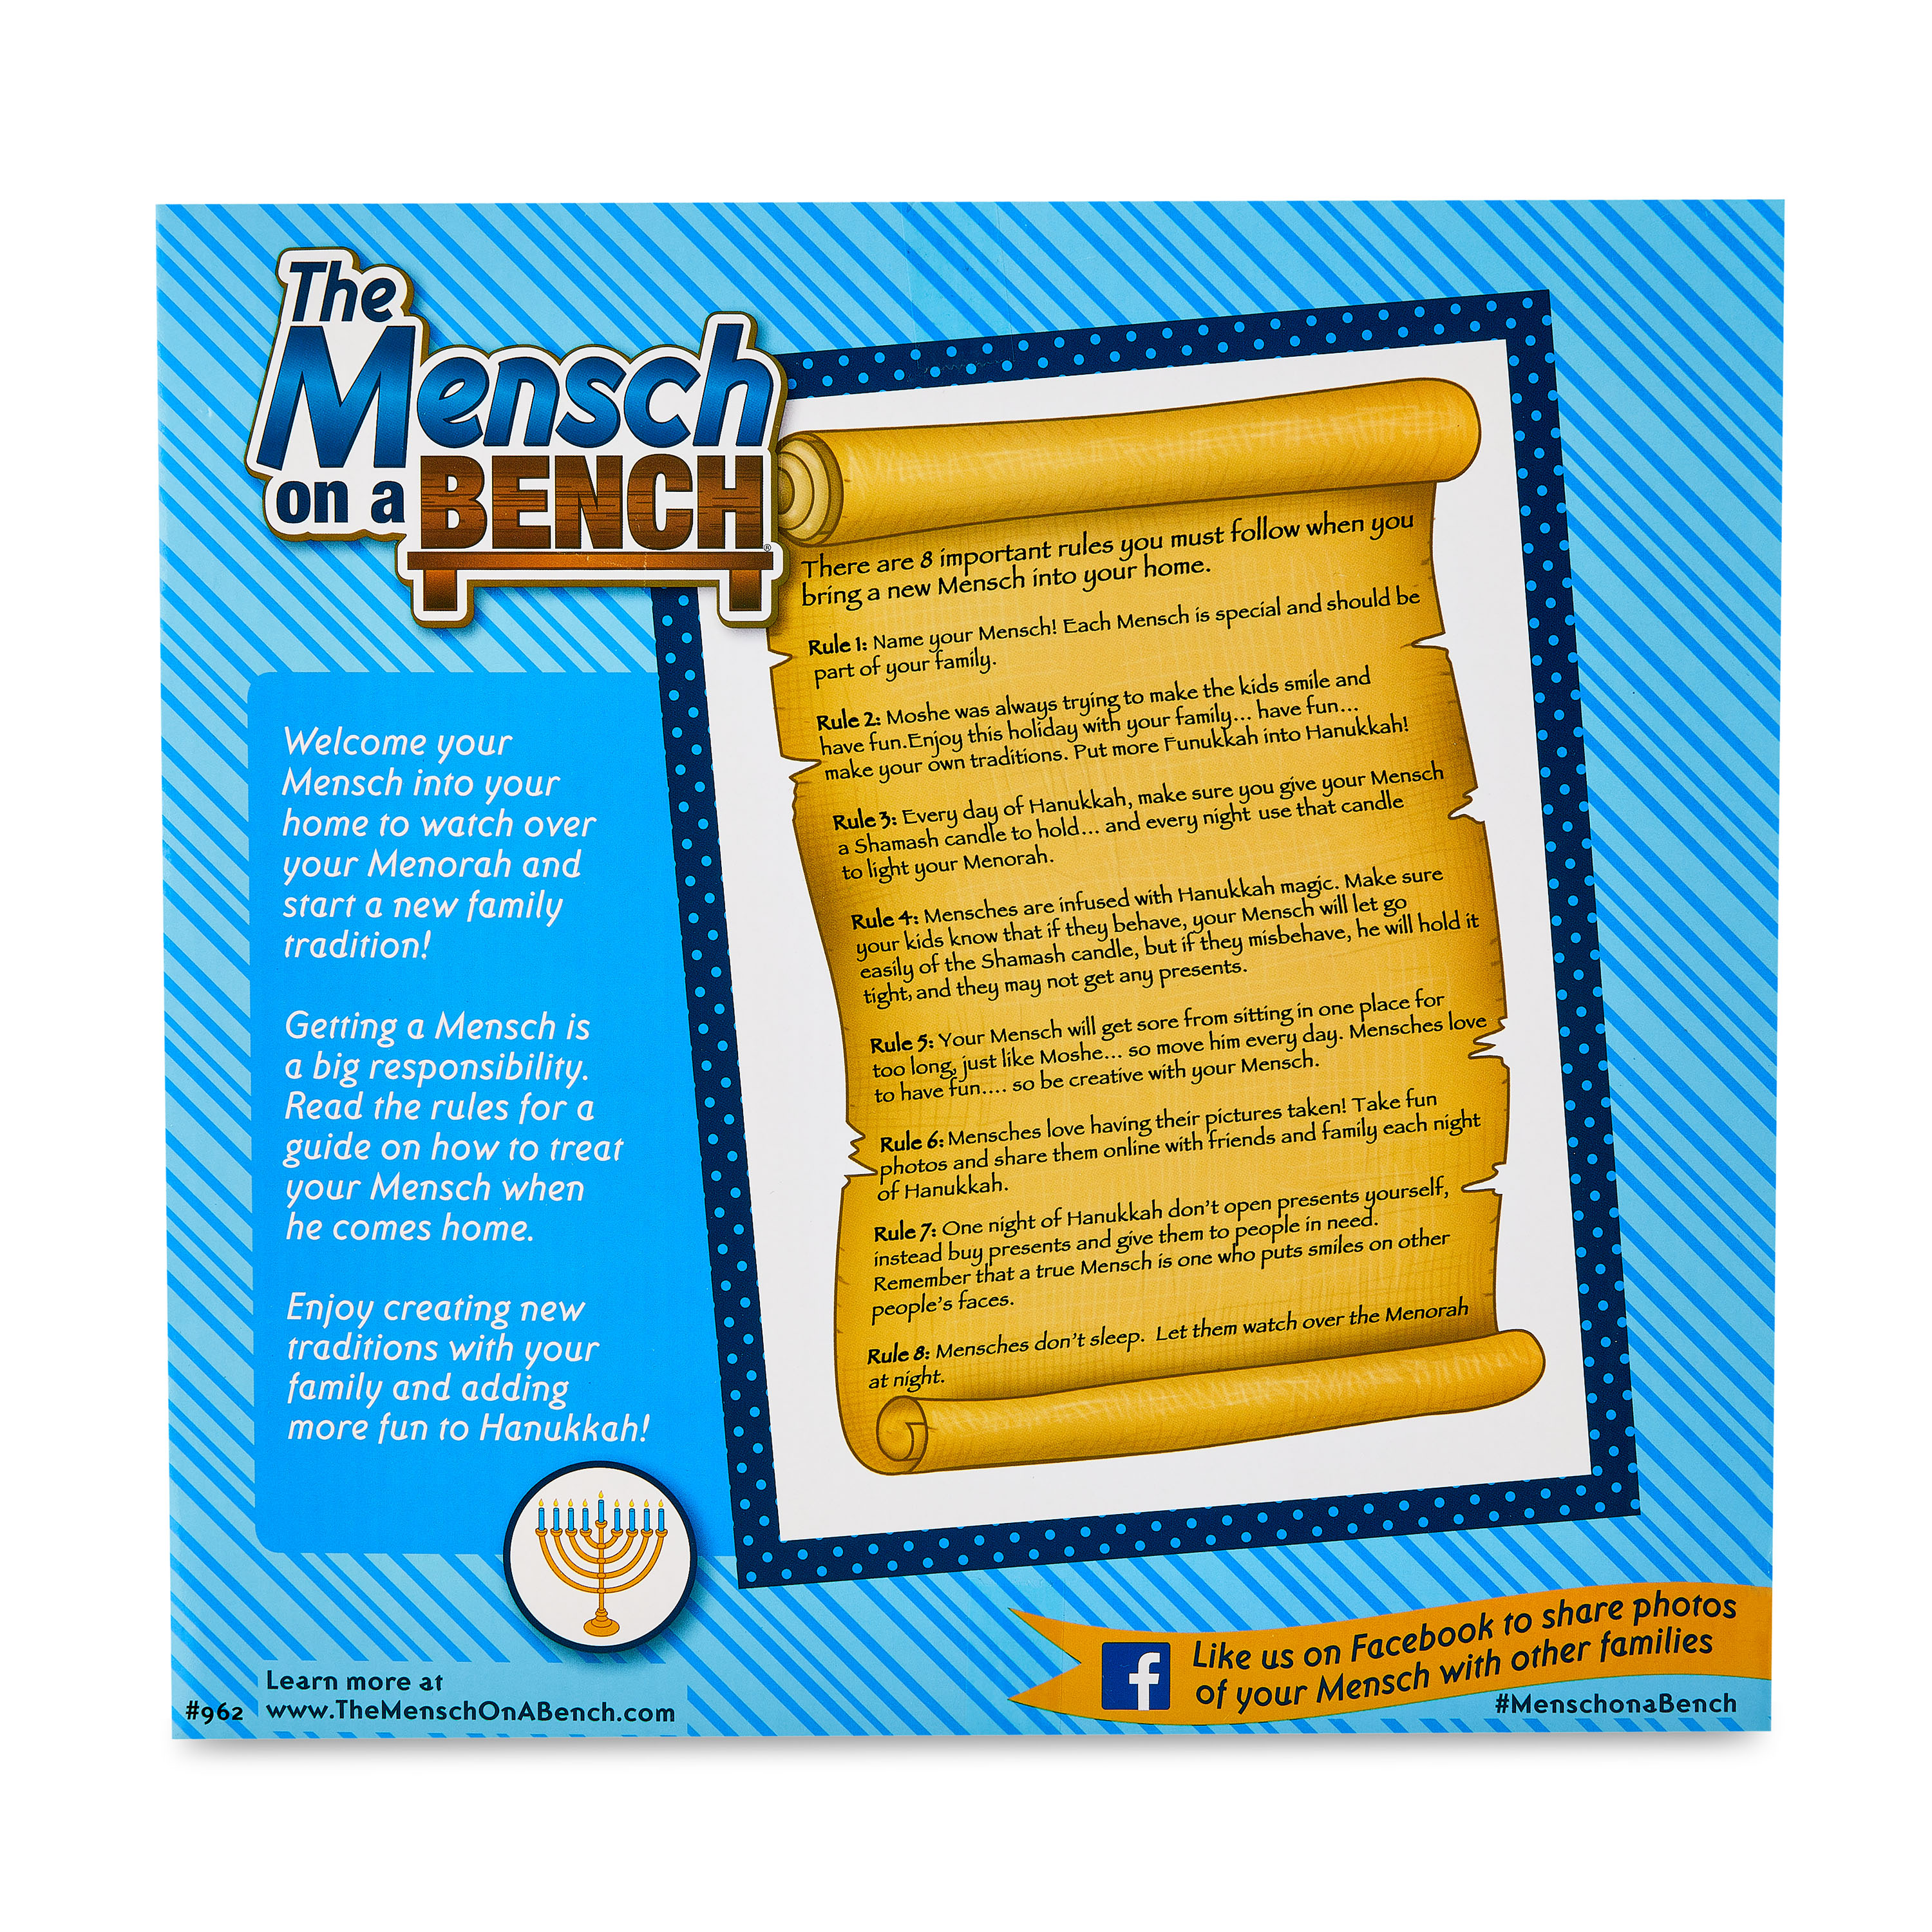 Mensch on a Bench 12" Hanukkah Moshe Plush Toy with Hardcover Book and Removable Bench - image 4 of 5